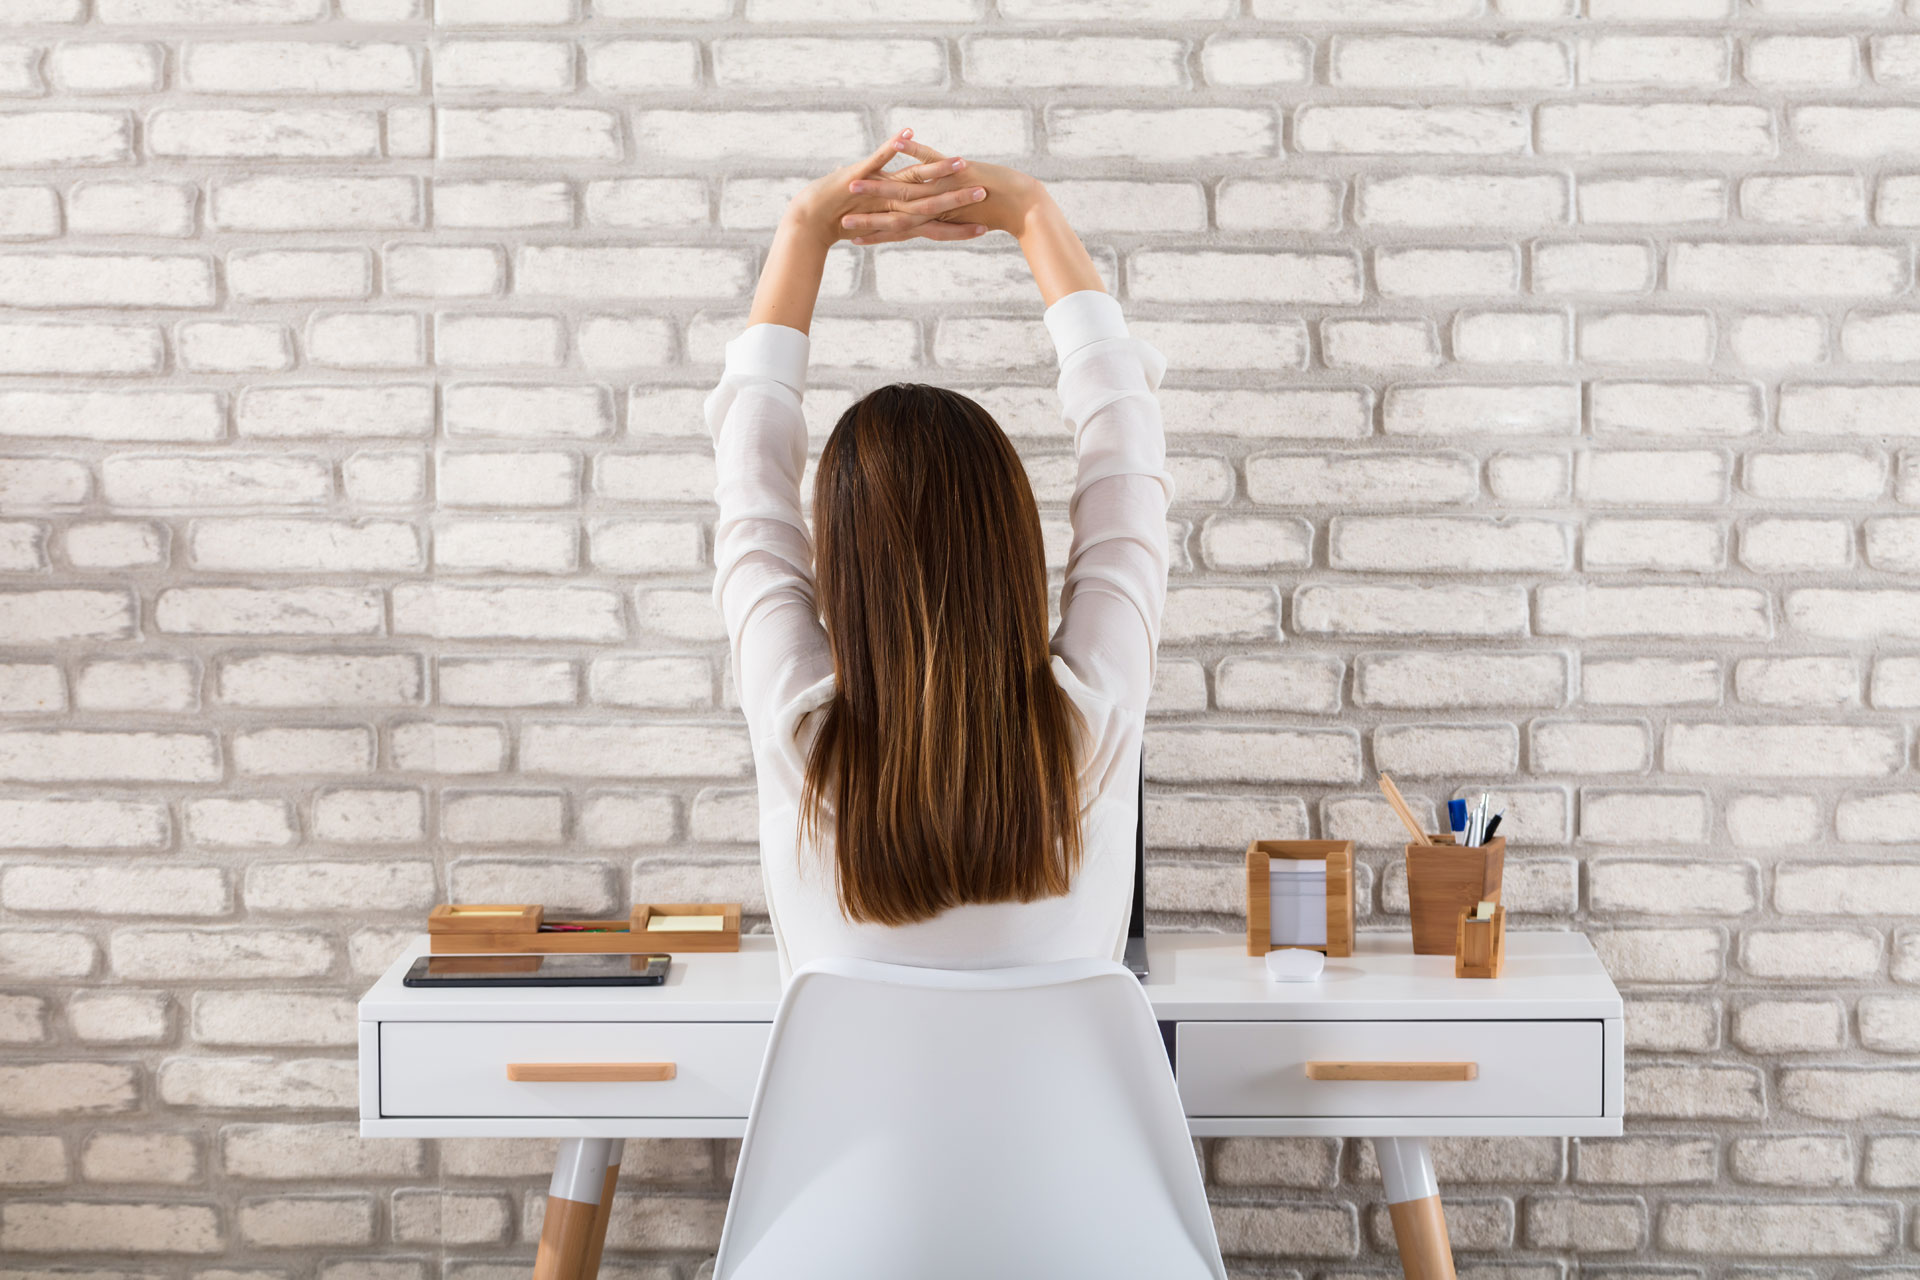 4 Exercises For Better Posture To Do From Your Desk